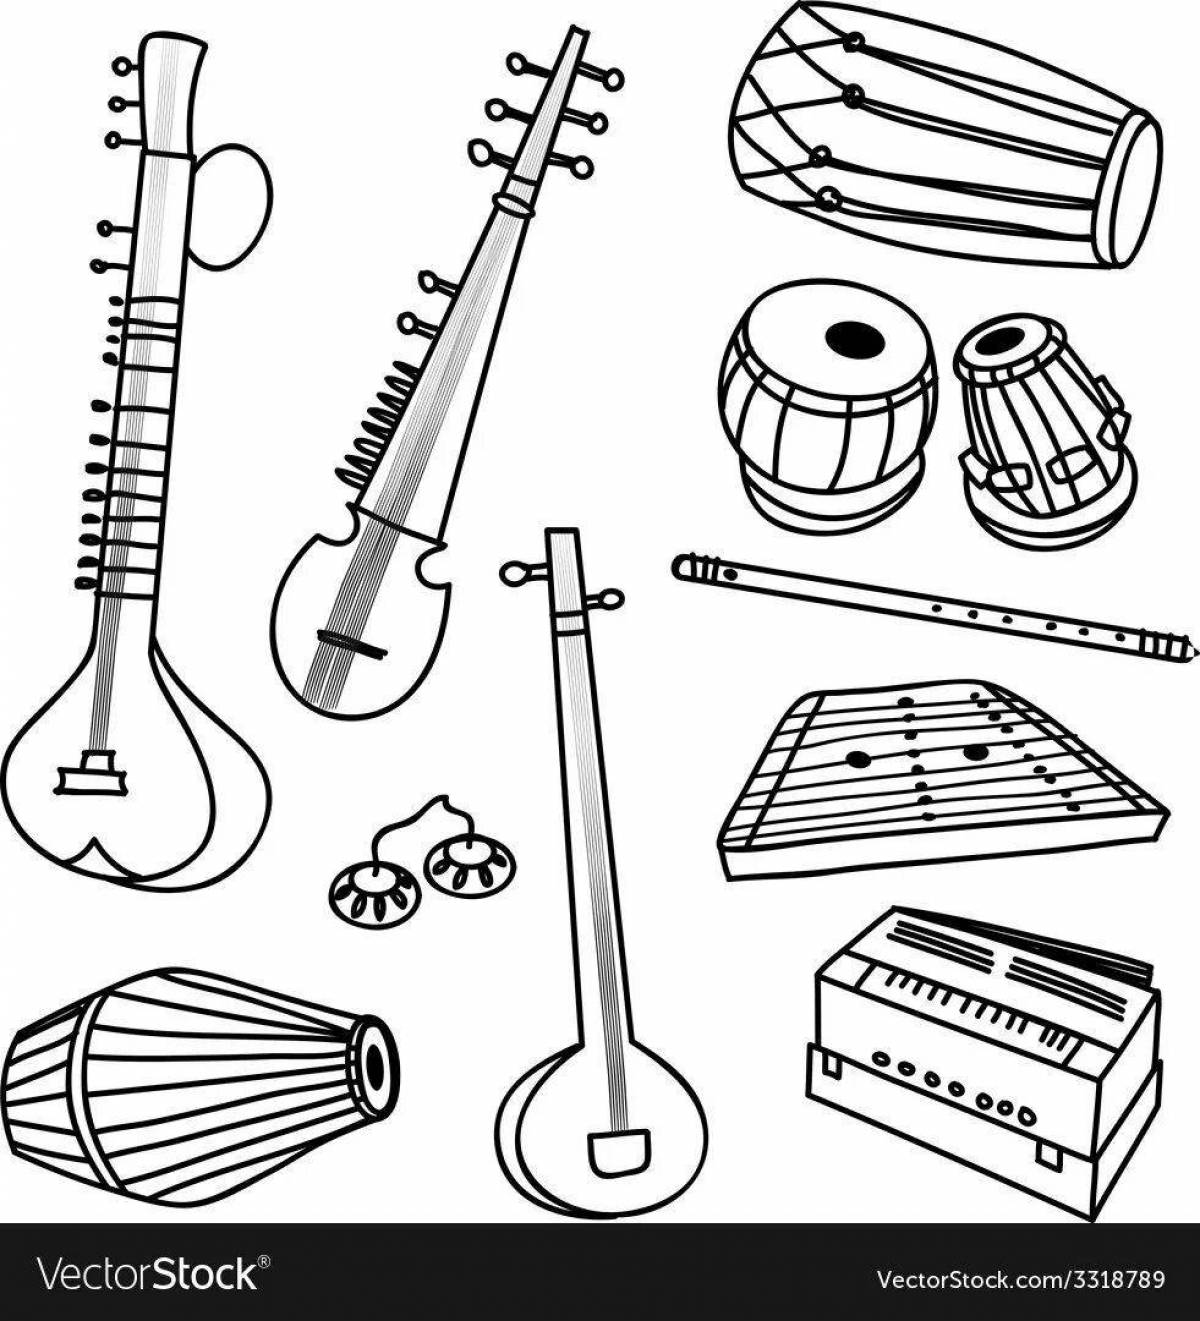 Charming musical instruments coloring book